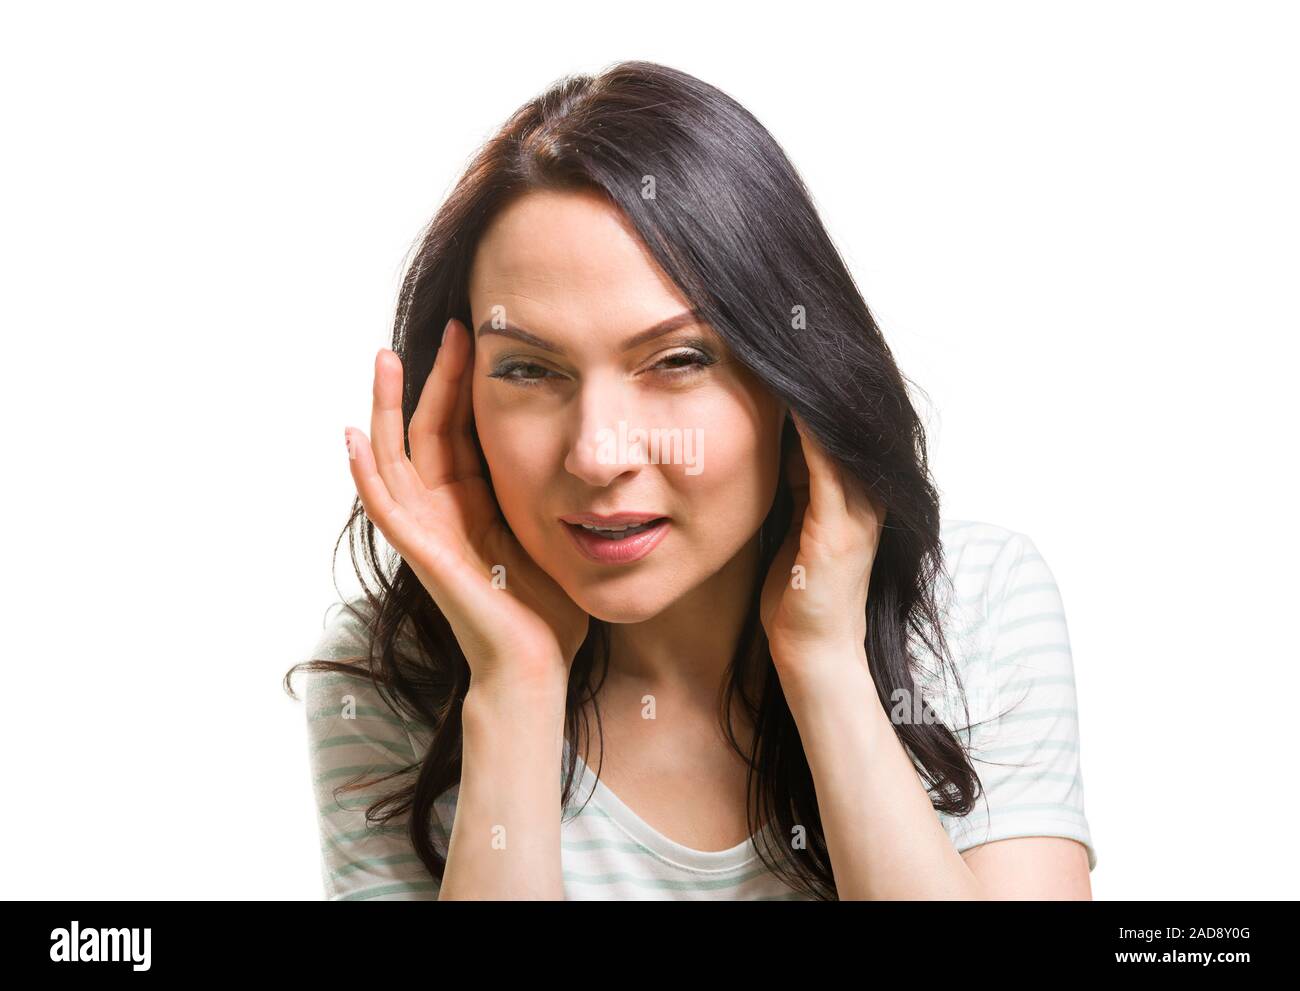 Woman without her glasses can't see Close up portrait Stock Photo - Alamy